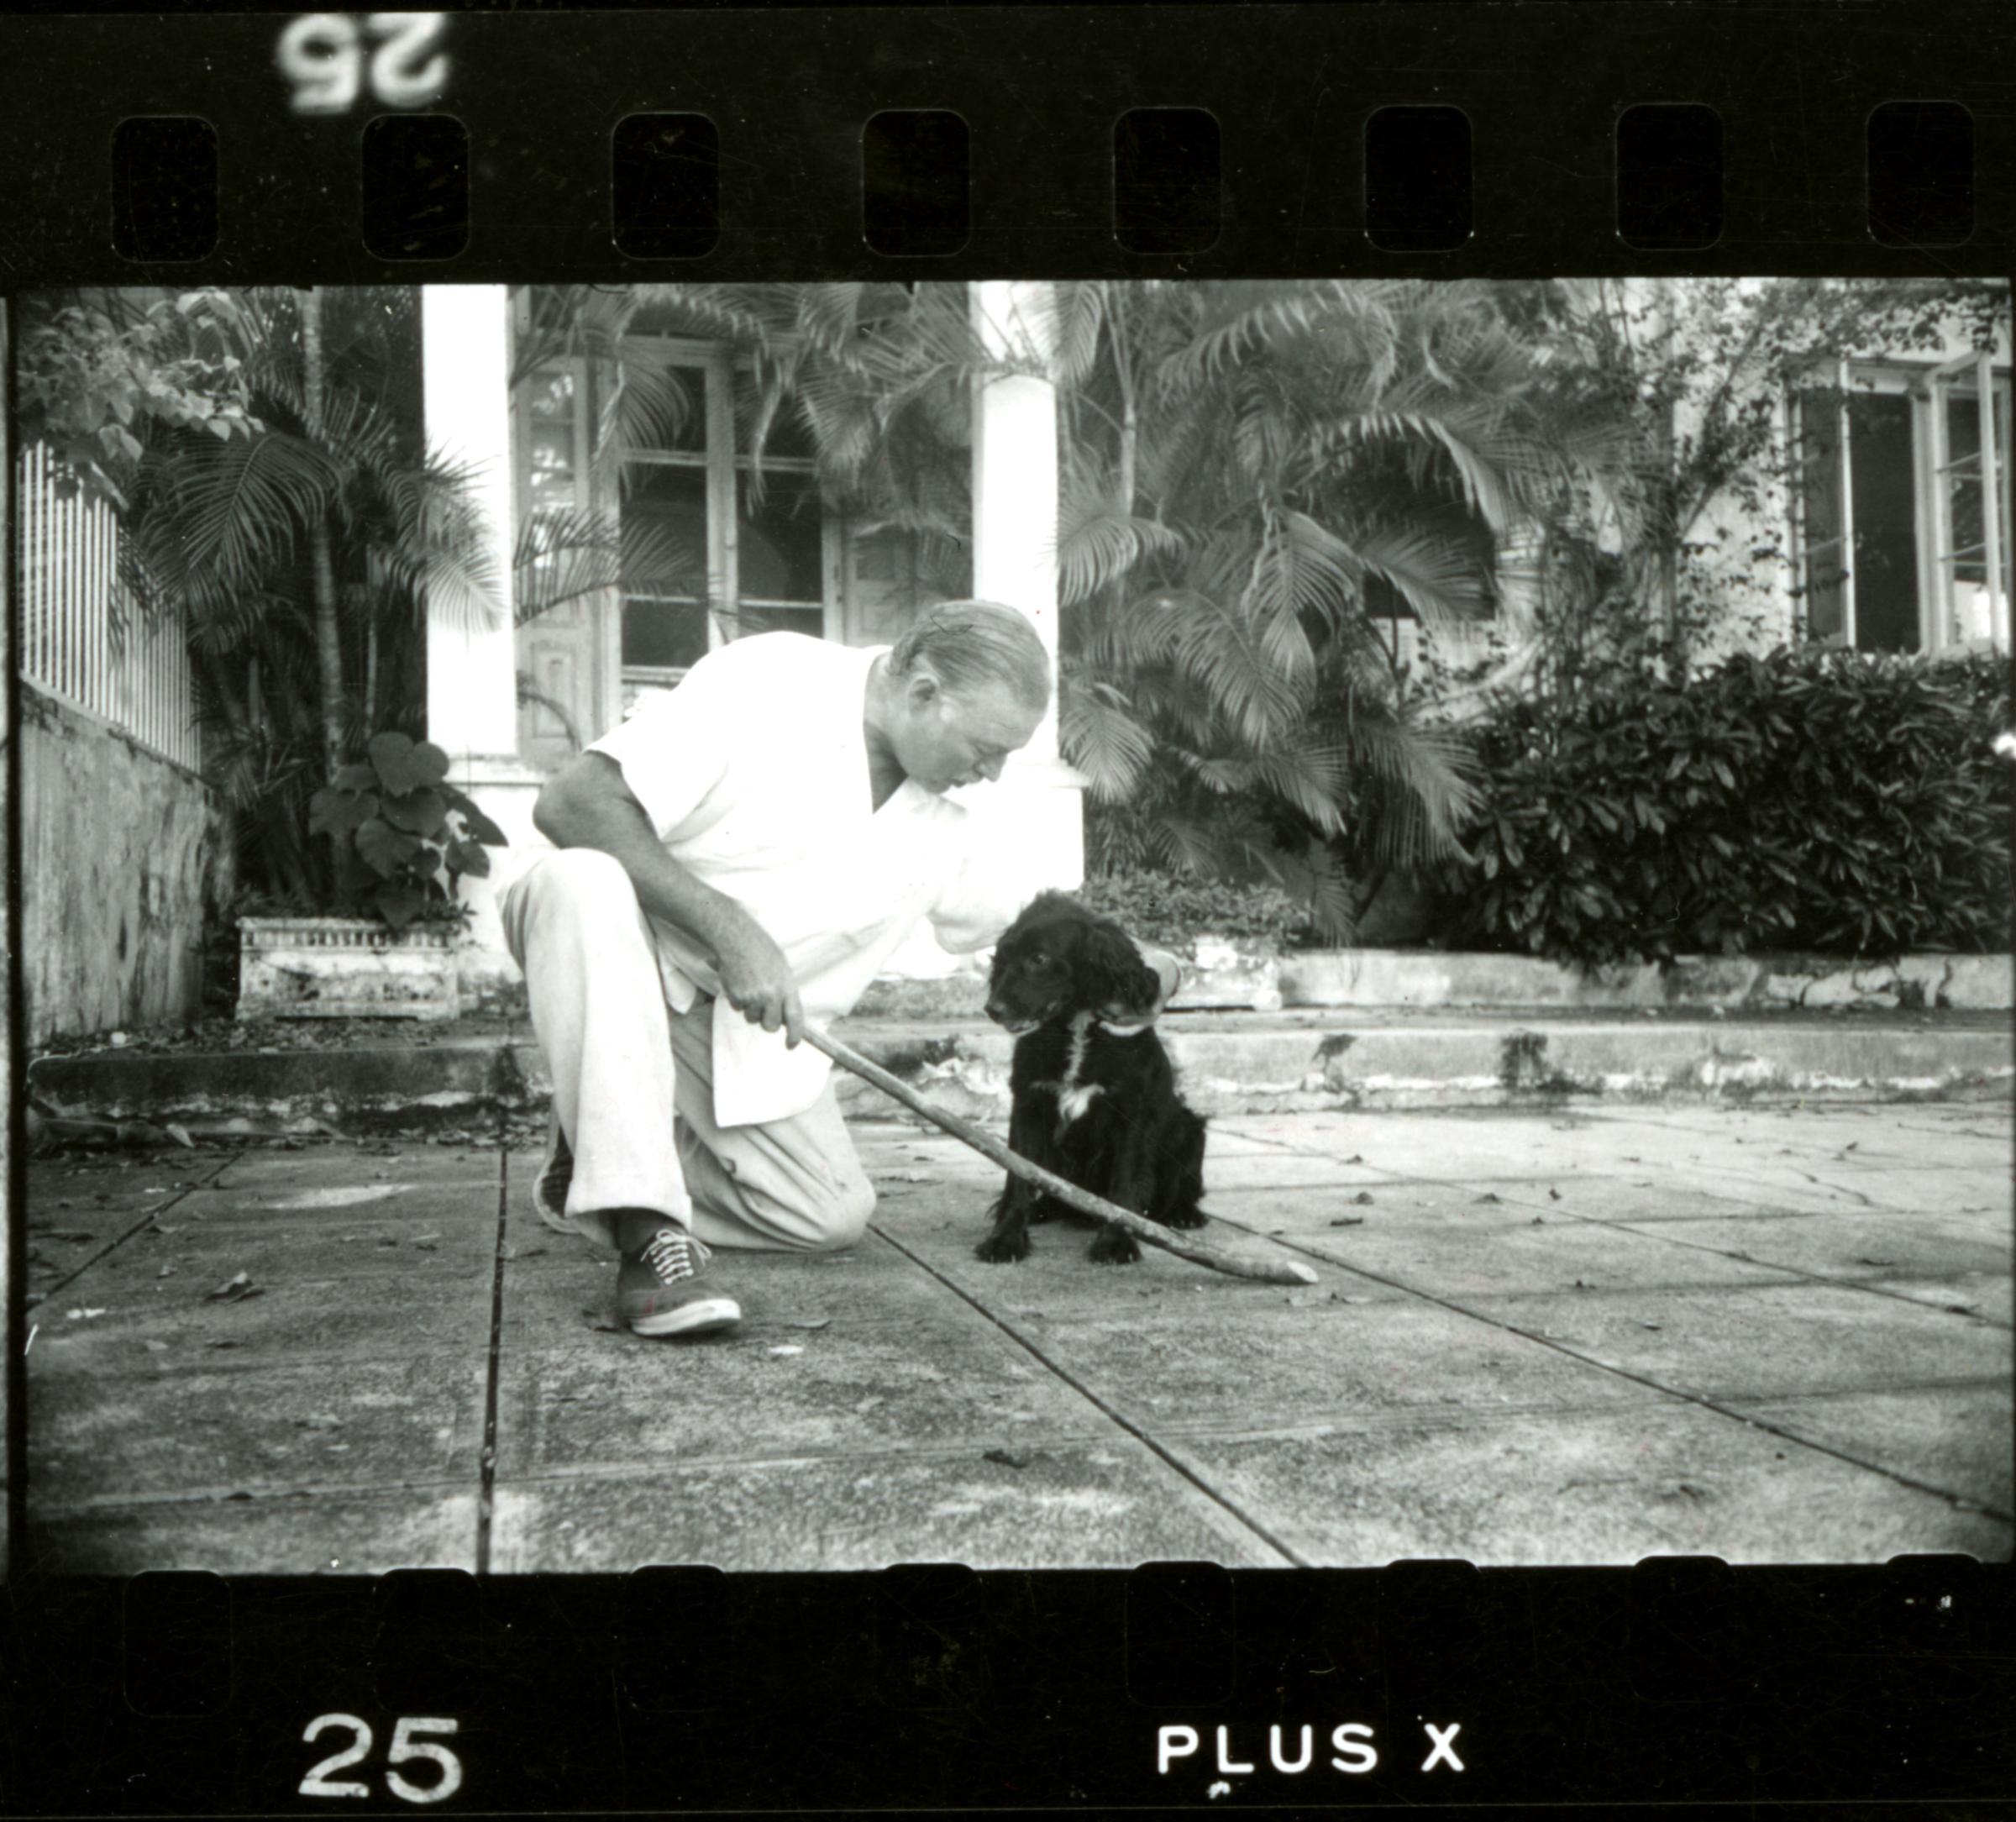 An image from a contact sheet of Alfred Eisenstaedt's pictures of Ernest Hemingway in Cuba, August 1952.